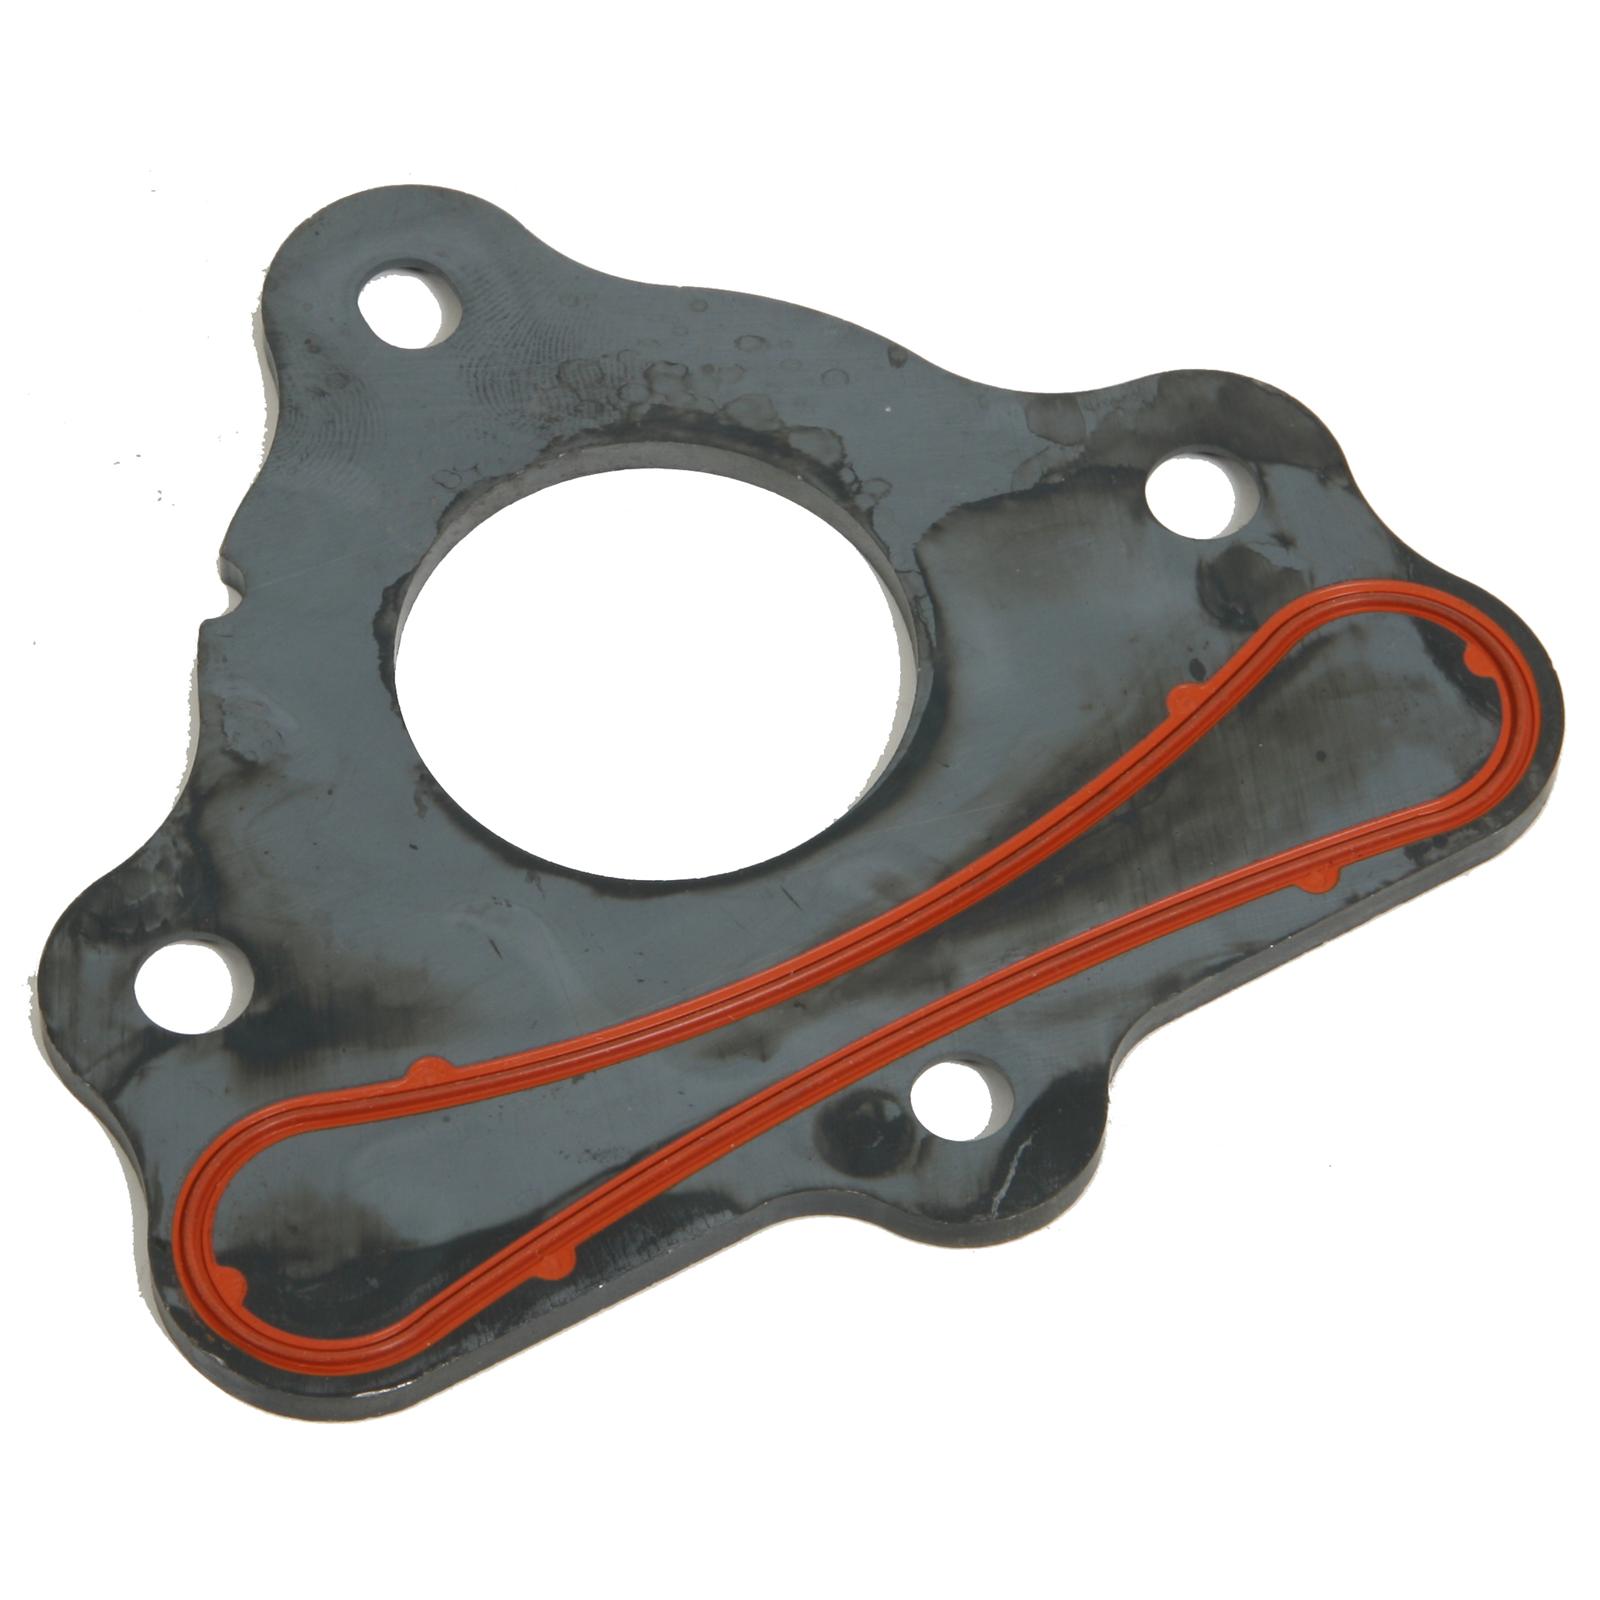 #018 CHNG018 Details about   Chain Guard for ZS125-50